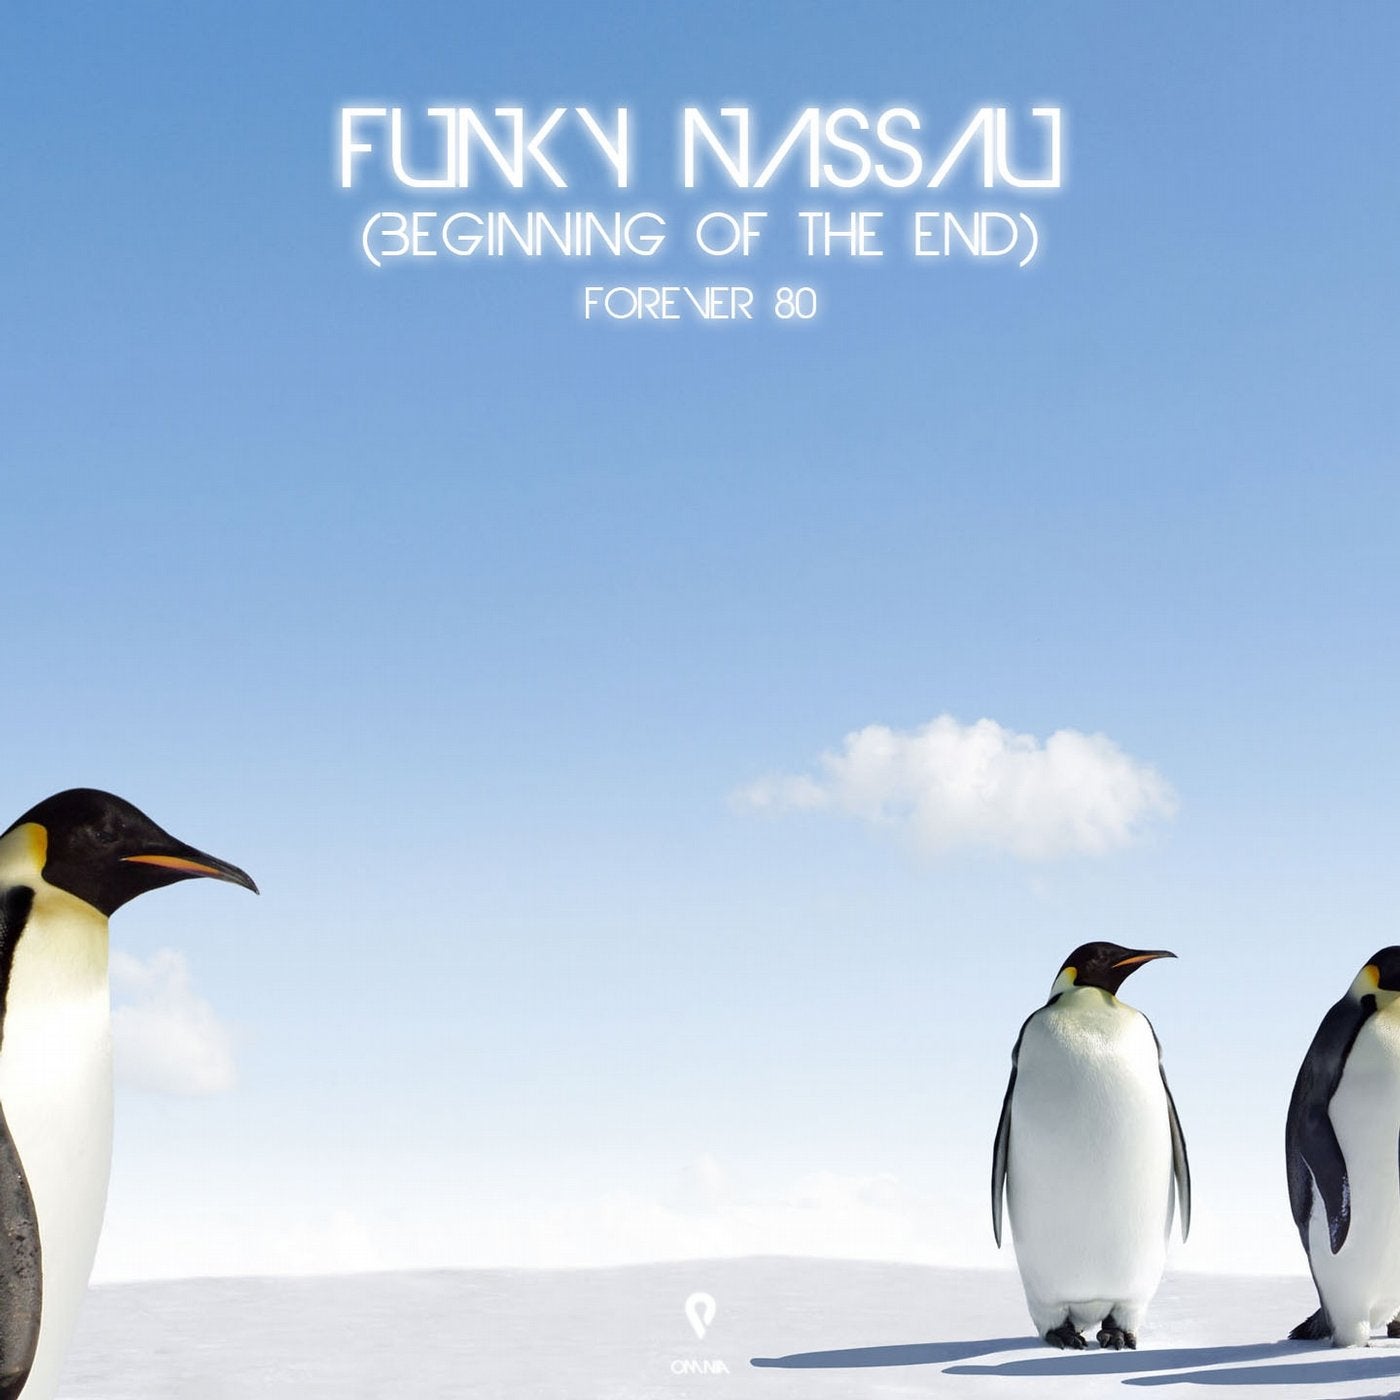 Funky Nassau (Beginning of the end)